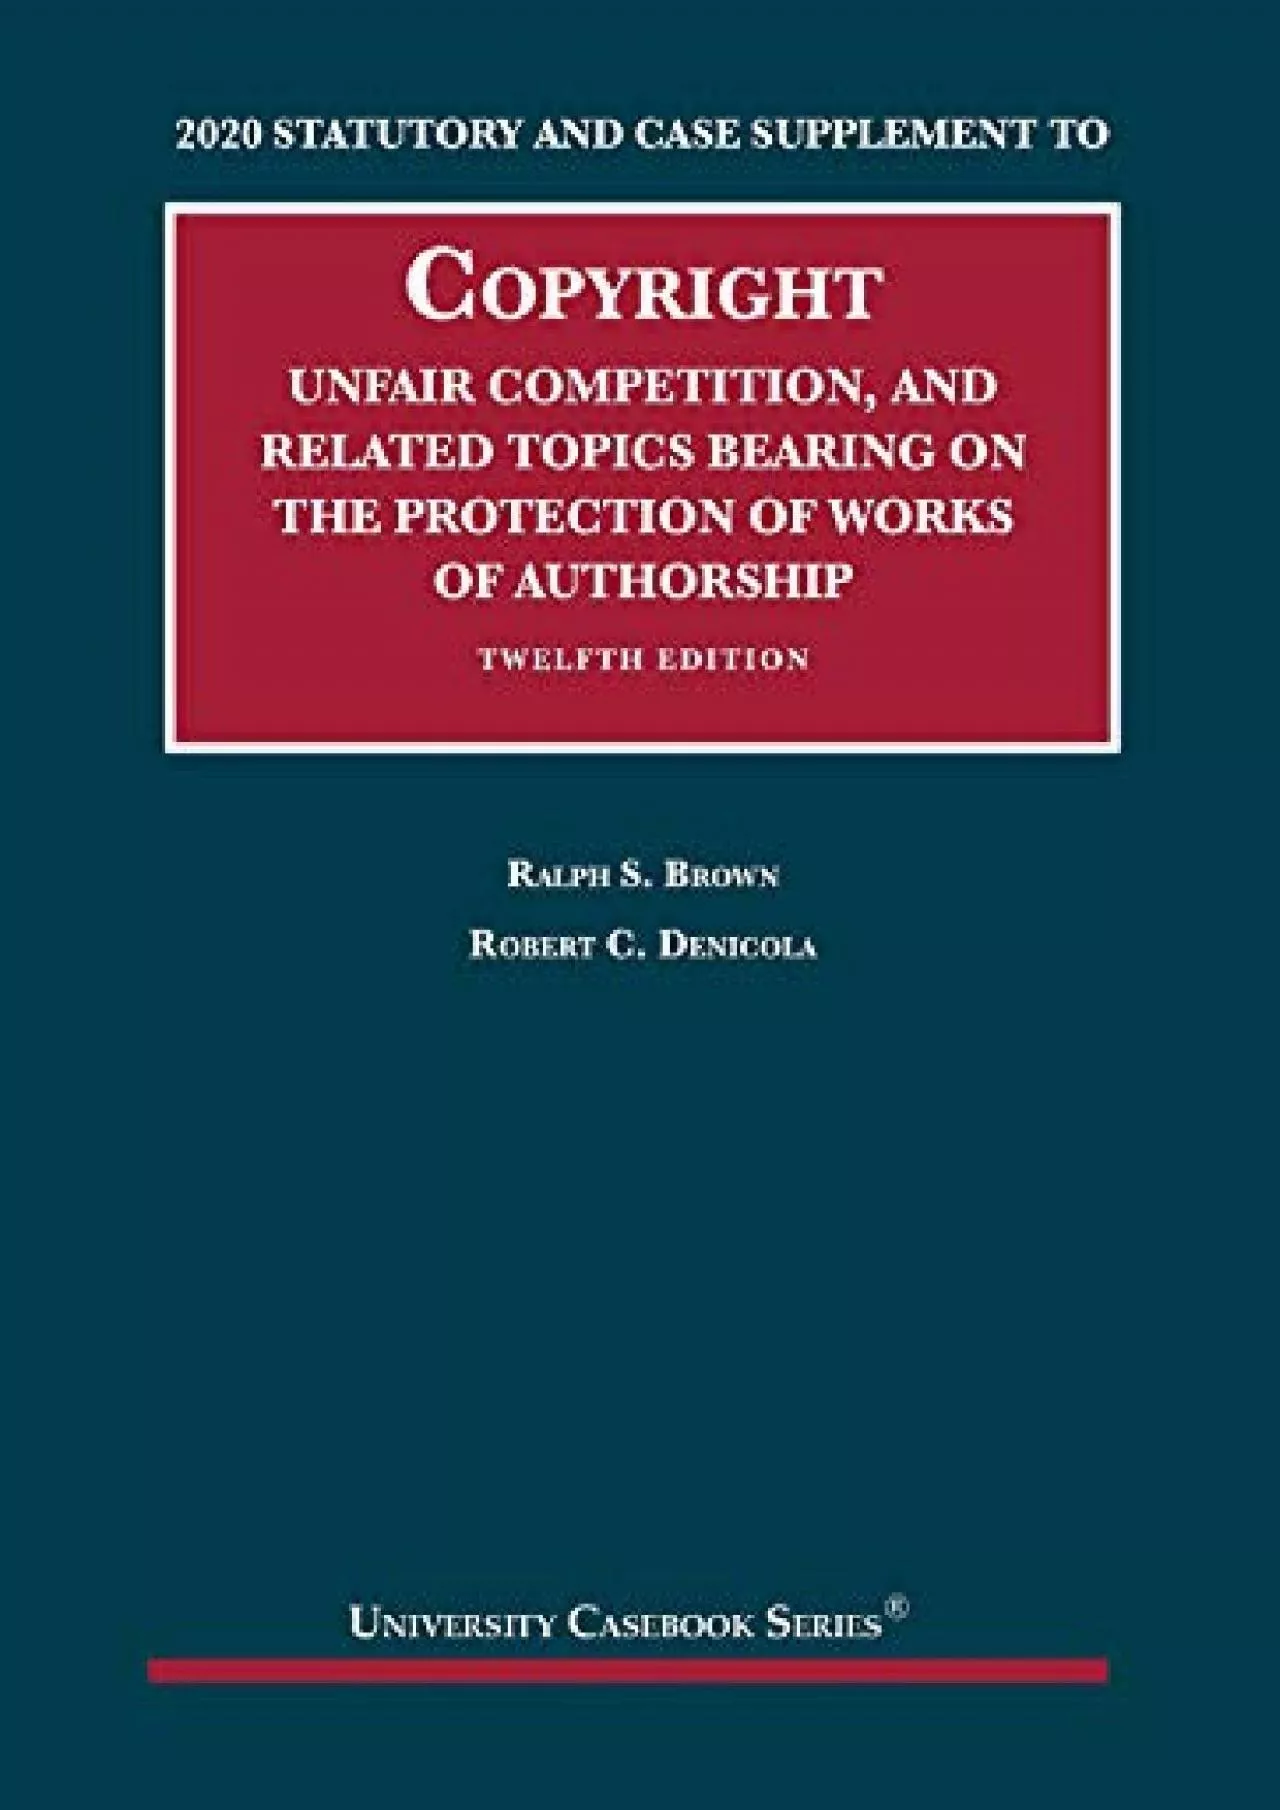 [PDF] DOWNLOAD Copyright, Unfair Competition, and Related Topics Bearing on the Protection